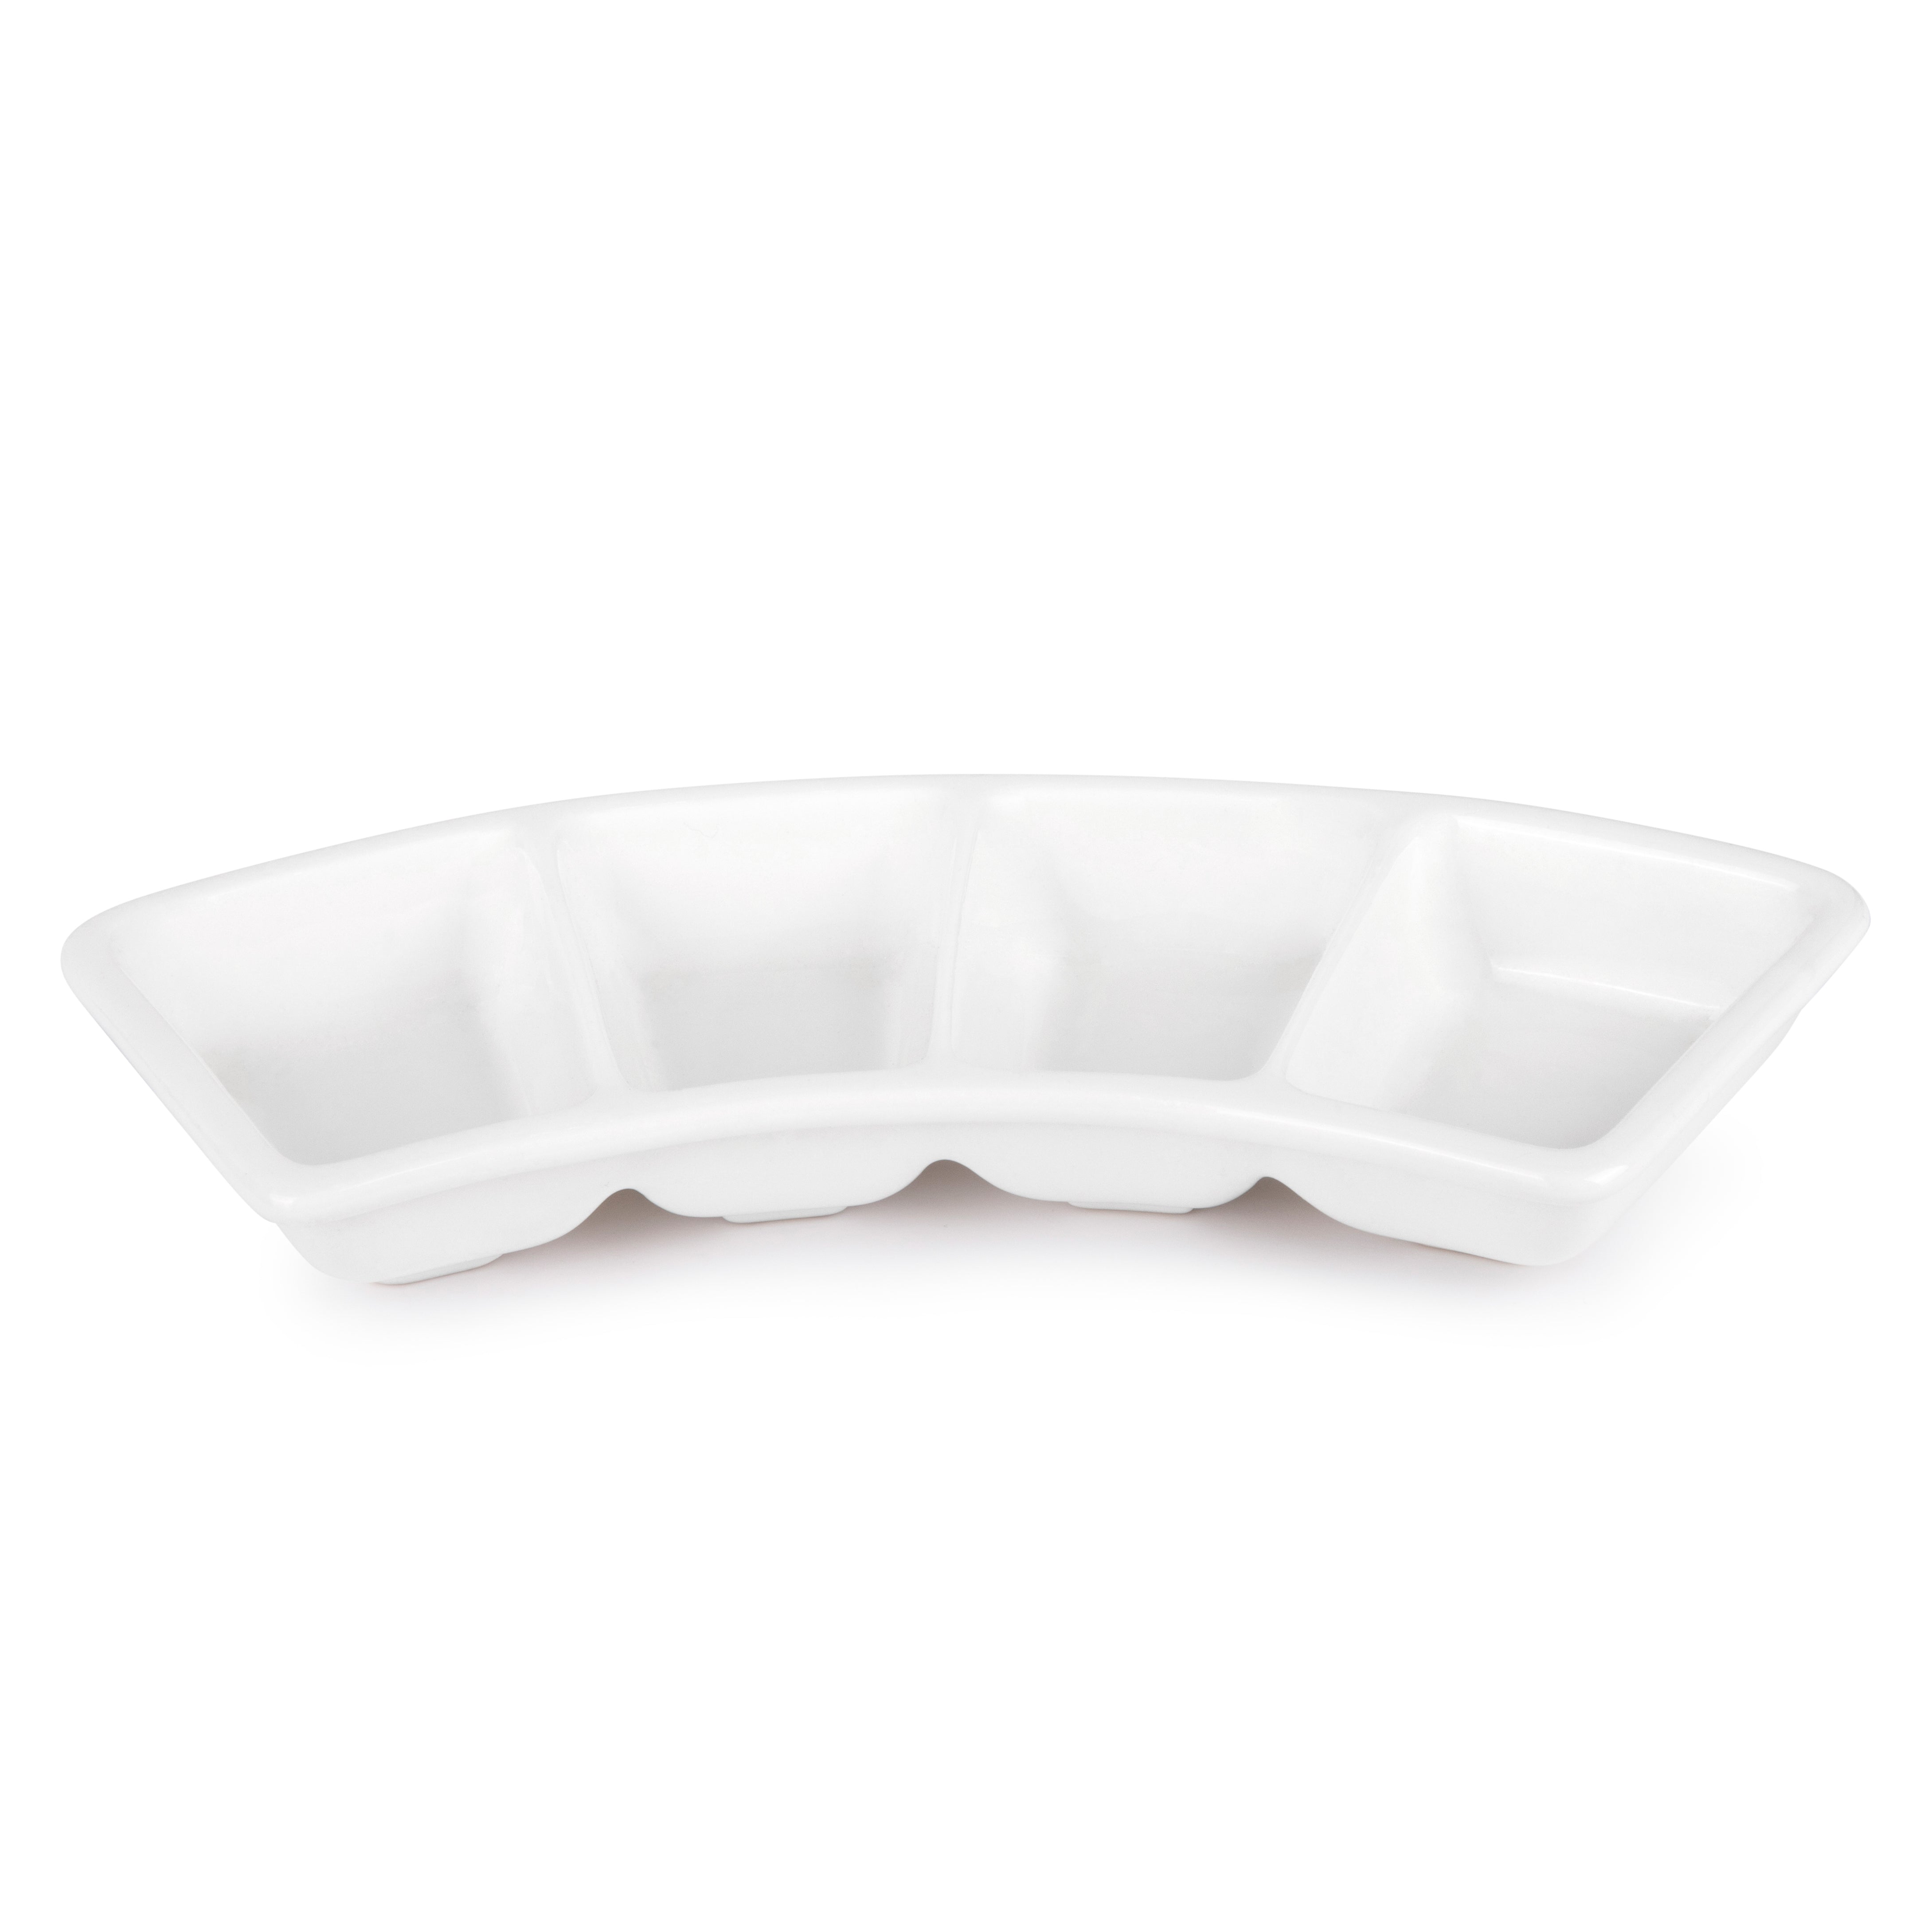 Dish crescent 4 Sectional